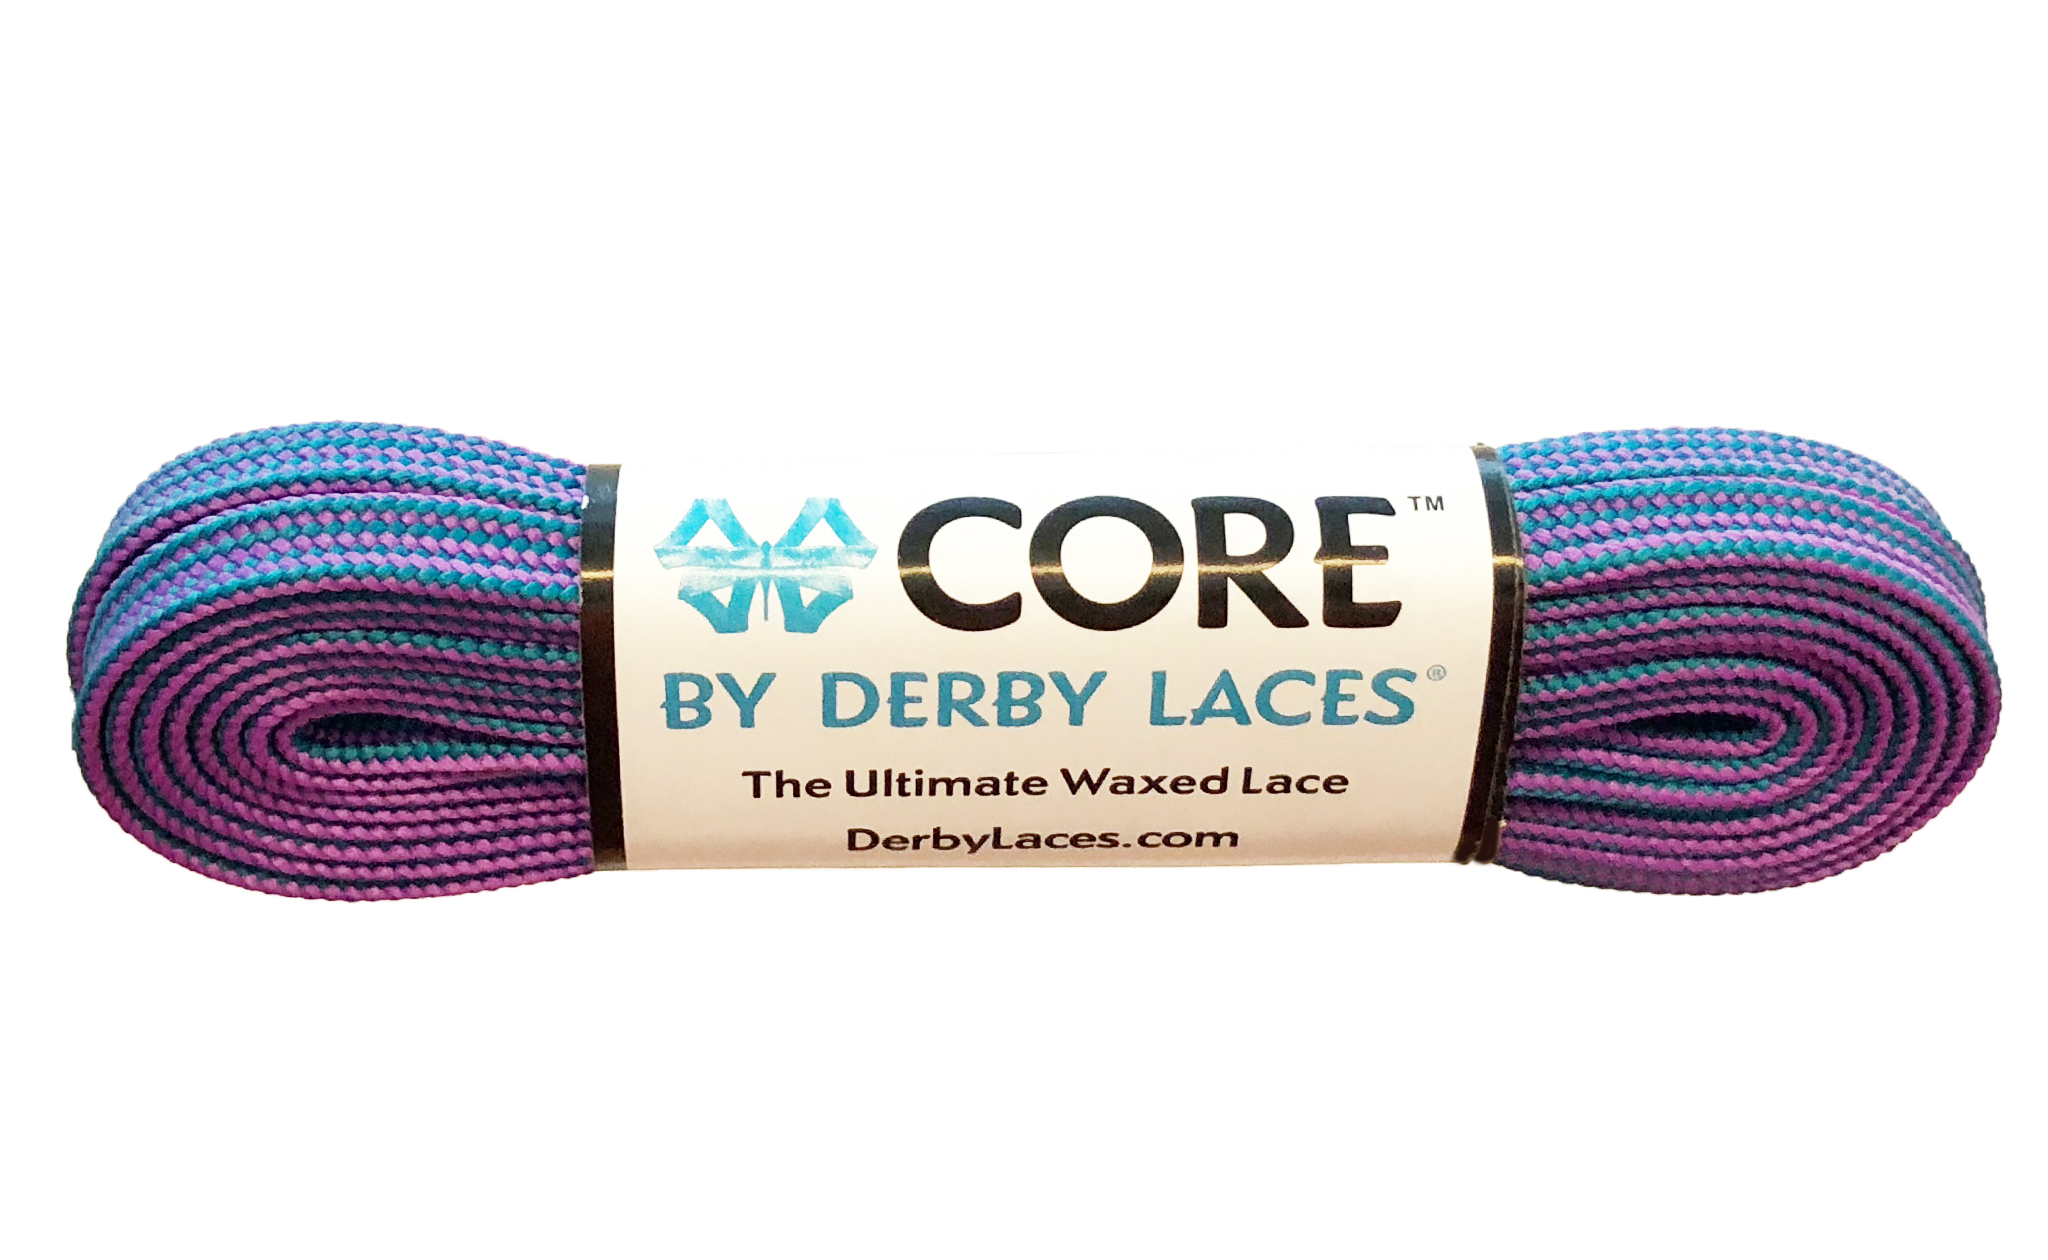 and Regular Shoes Roller Skates Boots Derby Laces CORE Narrow 6mm Waxed Lace for Figure Skates 